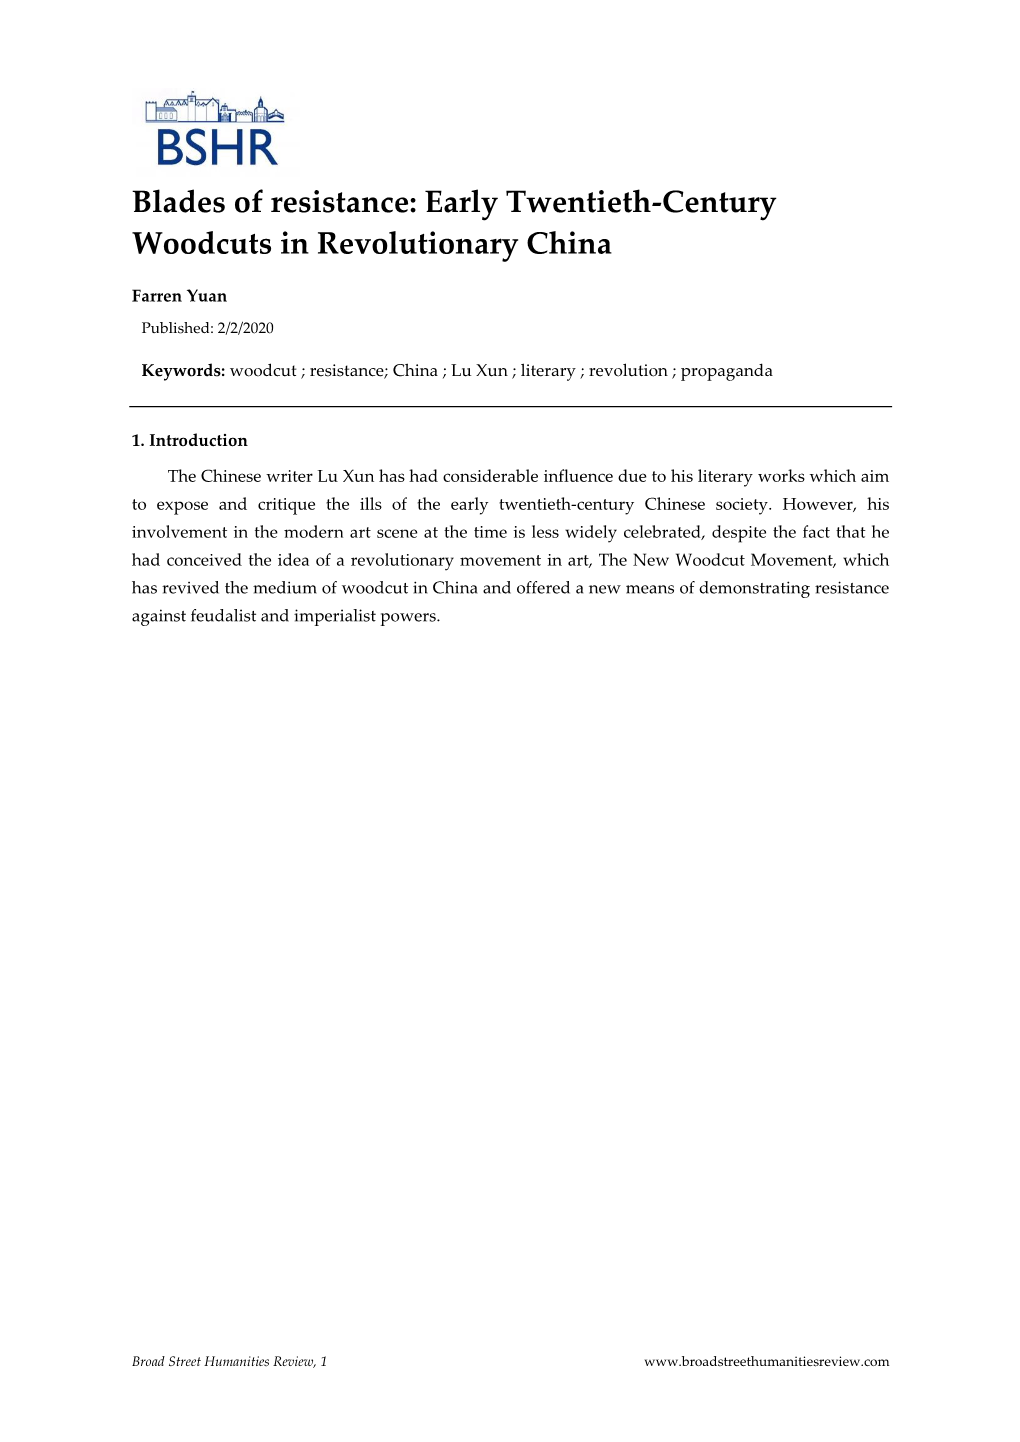 Blades of Resistance: Early Twentieth-Century Woodcuts in Revolutionary China